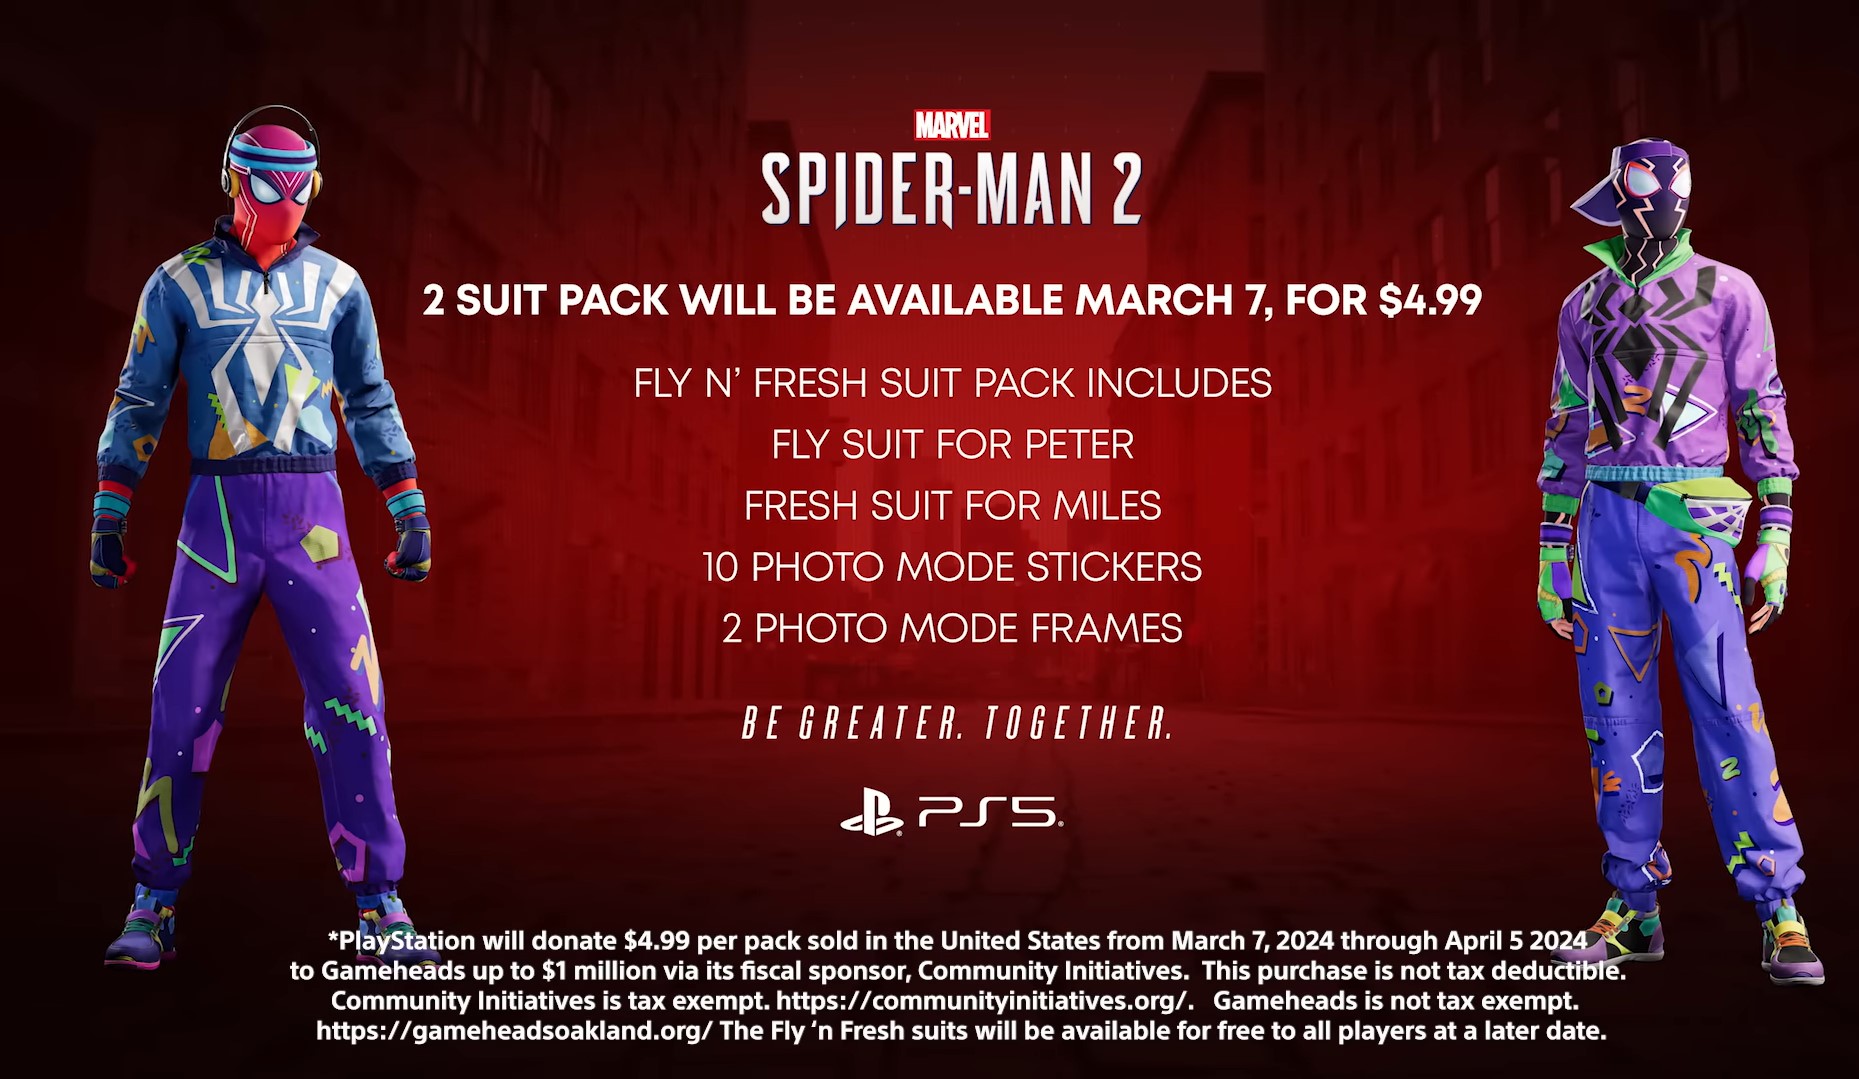 Insomniac Games Will Sell New Spider-Man 2 Suits For $5 For The First Time. See Why